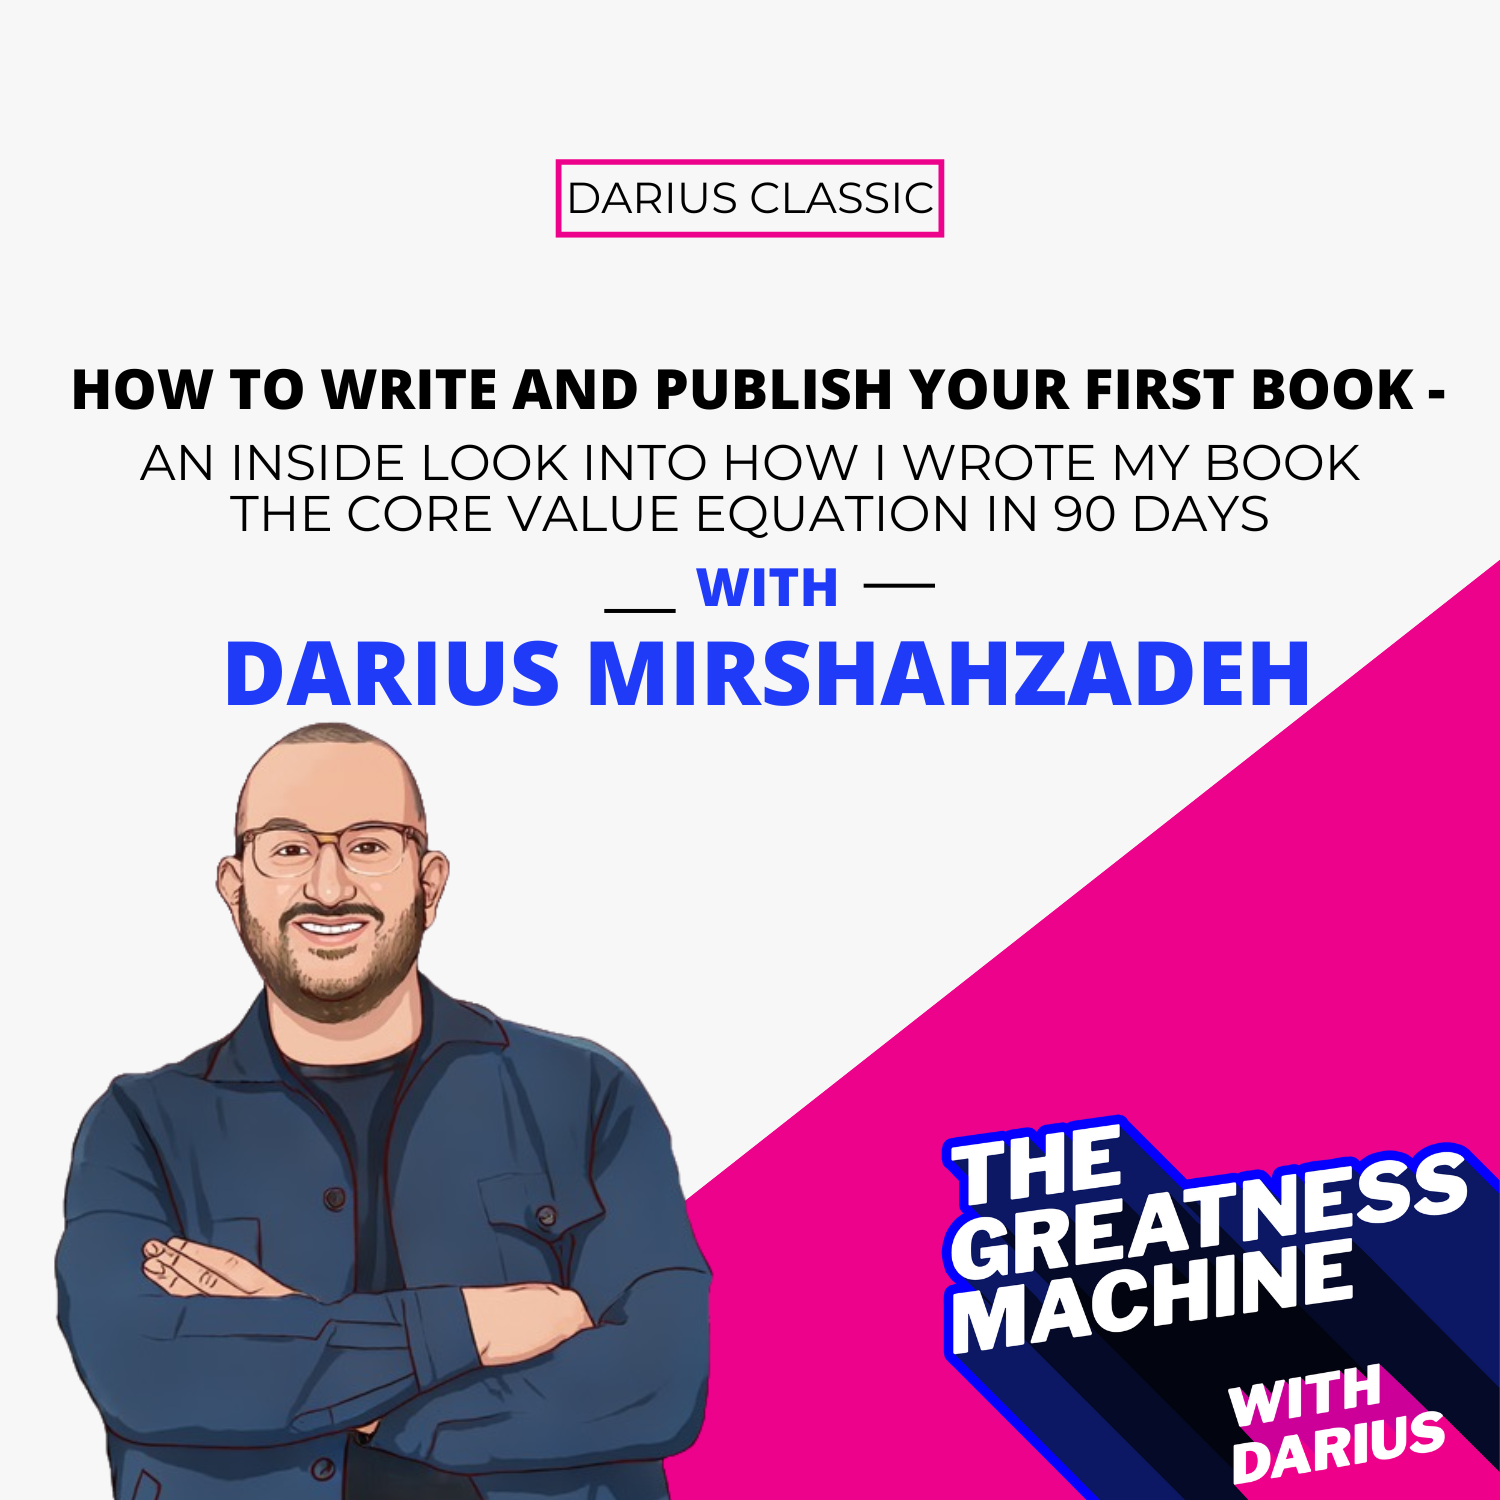 Greatness Machine Thumbnail (Classic how to write and publish your book)